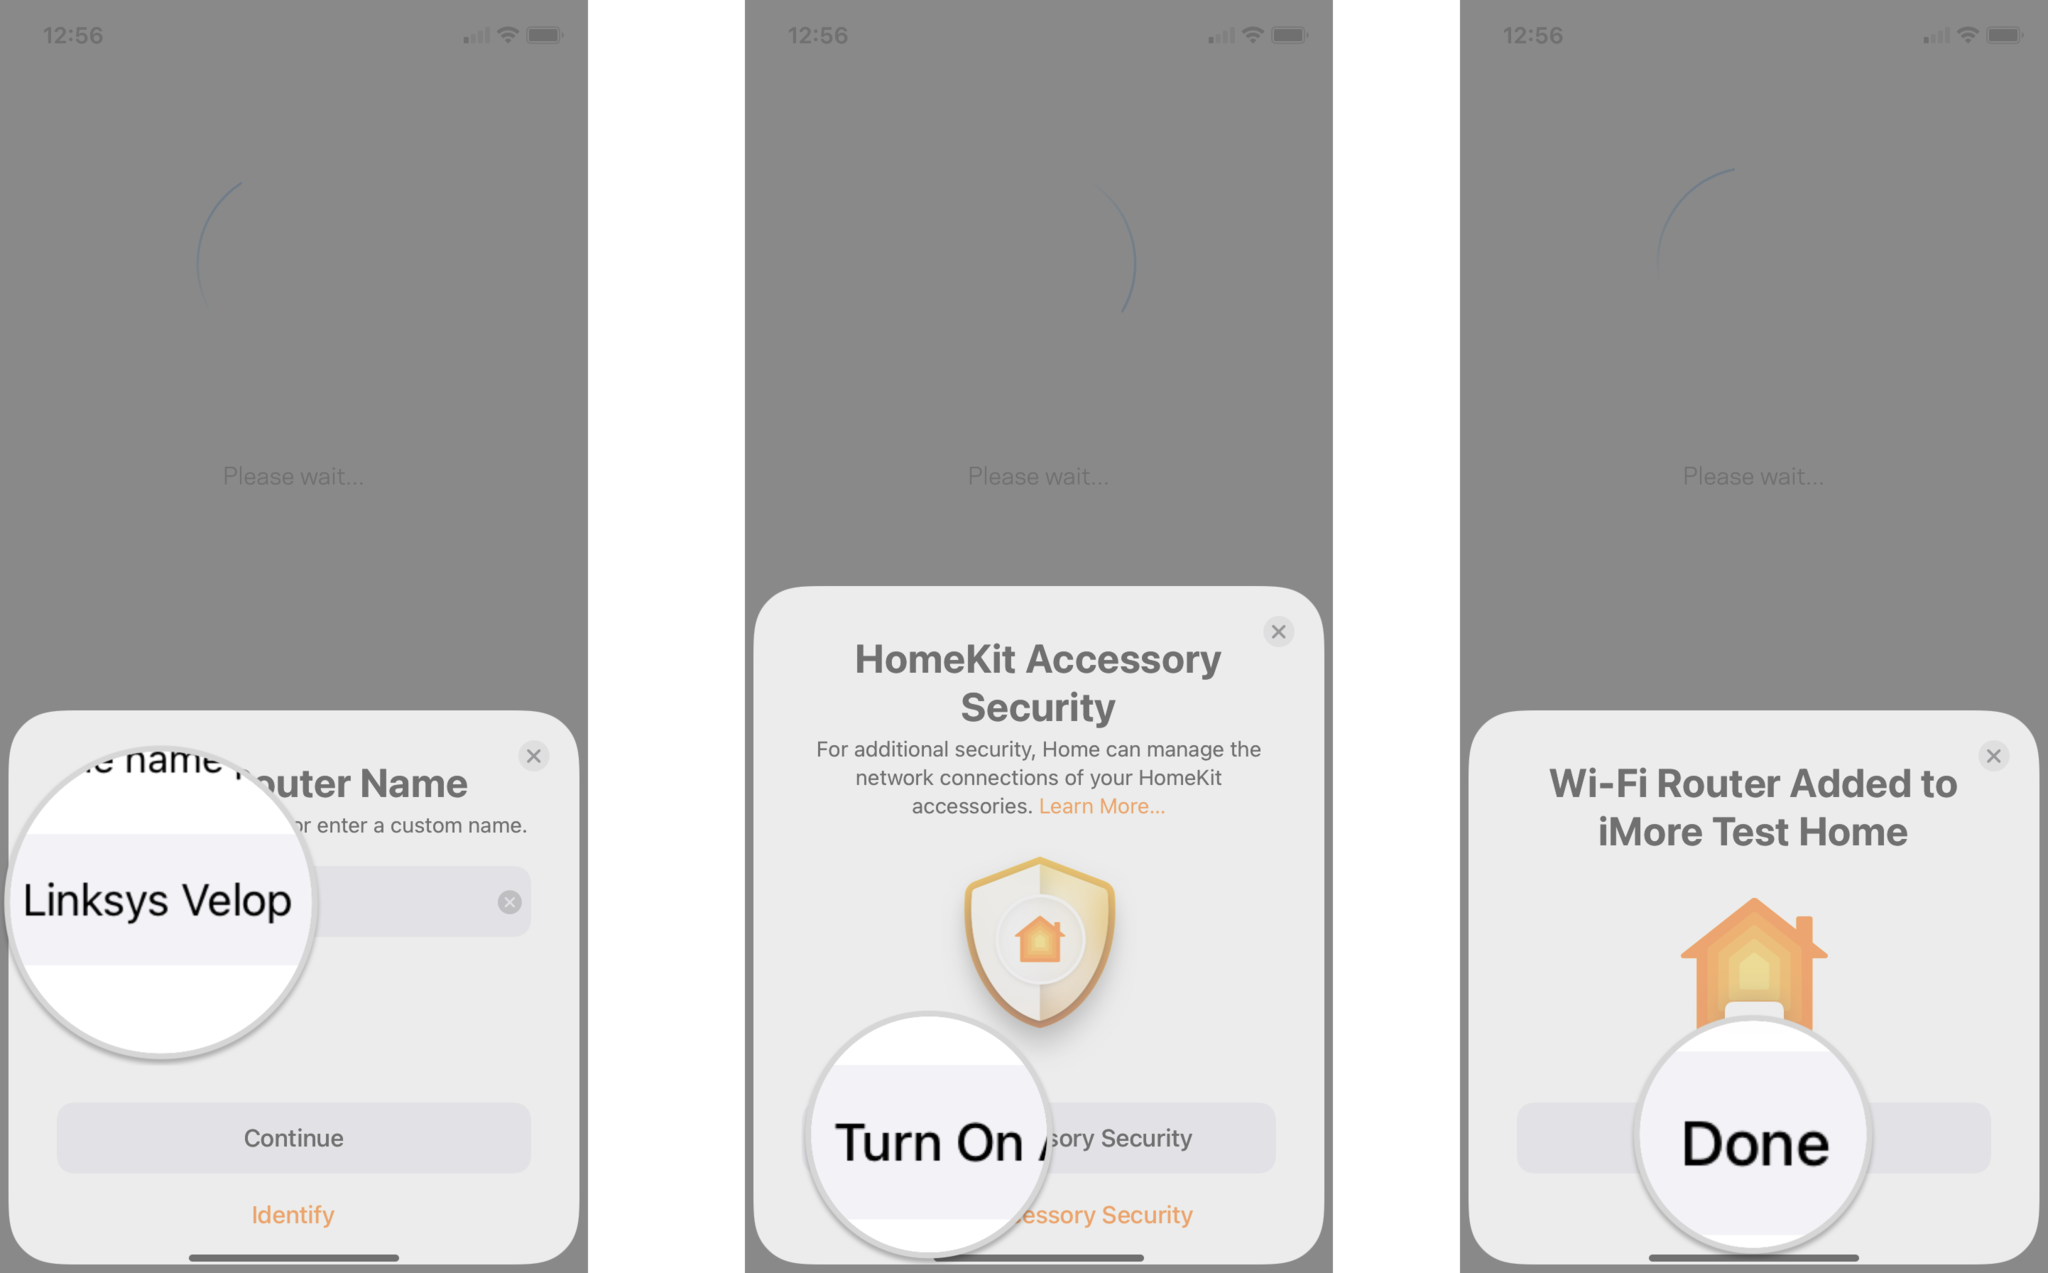 How to upgrade your Linksys Velop router to a HomeKit Secure Router on the iPhone by showing steps: Type in a Name then tap Continue, Tap Turn On Accessory Security, Tap Done